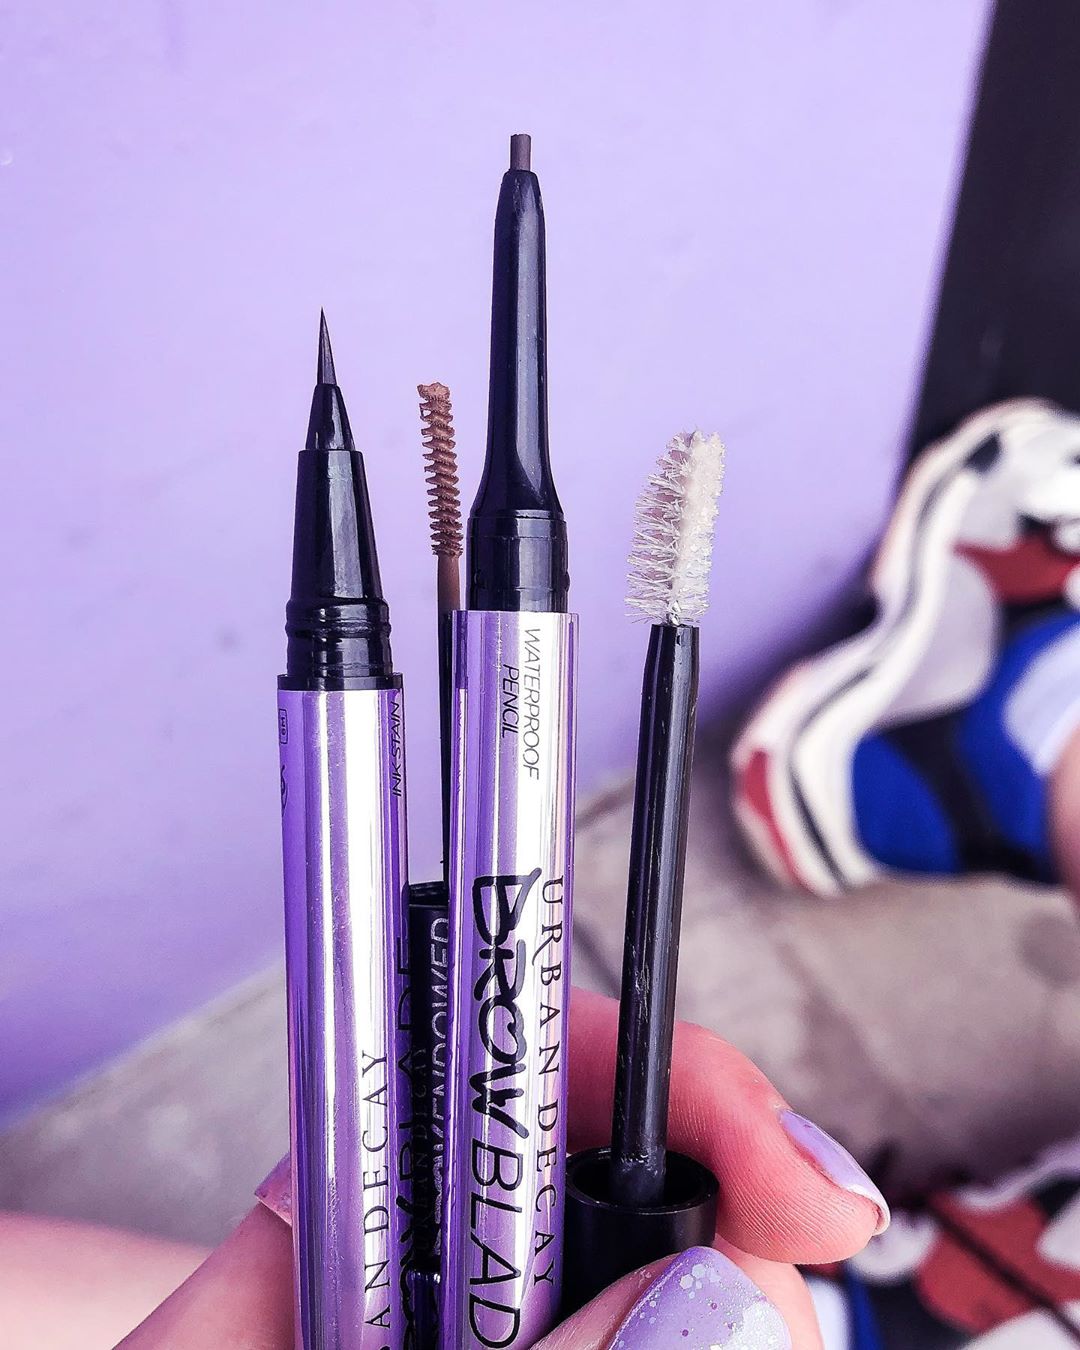 Urban Decay Cosmetics - You deserve good brows. 💜 Shop our entire Brow Collection right now (everything is $15!) exclusively on UrbanDecay.com! Offer ends soon. Tap to shop while supplies last 👆 #Urba...